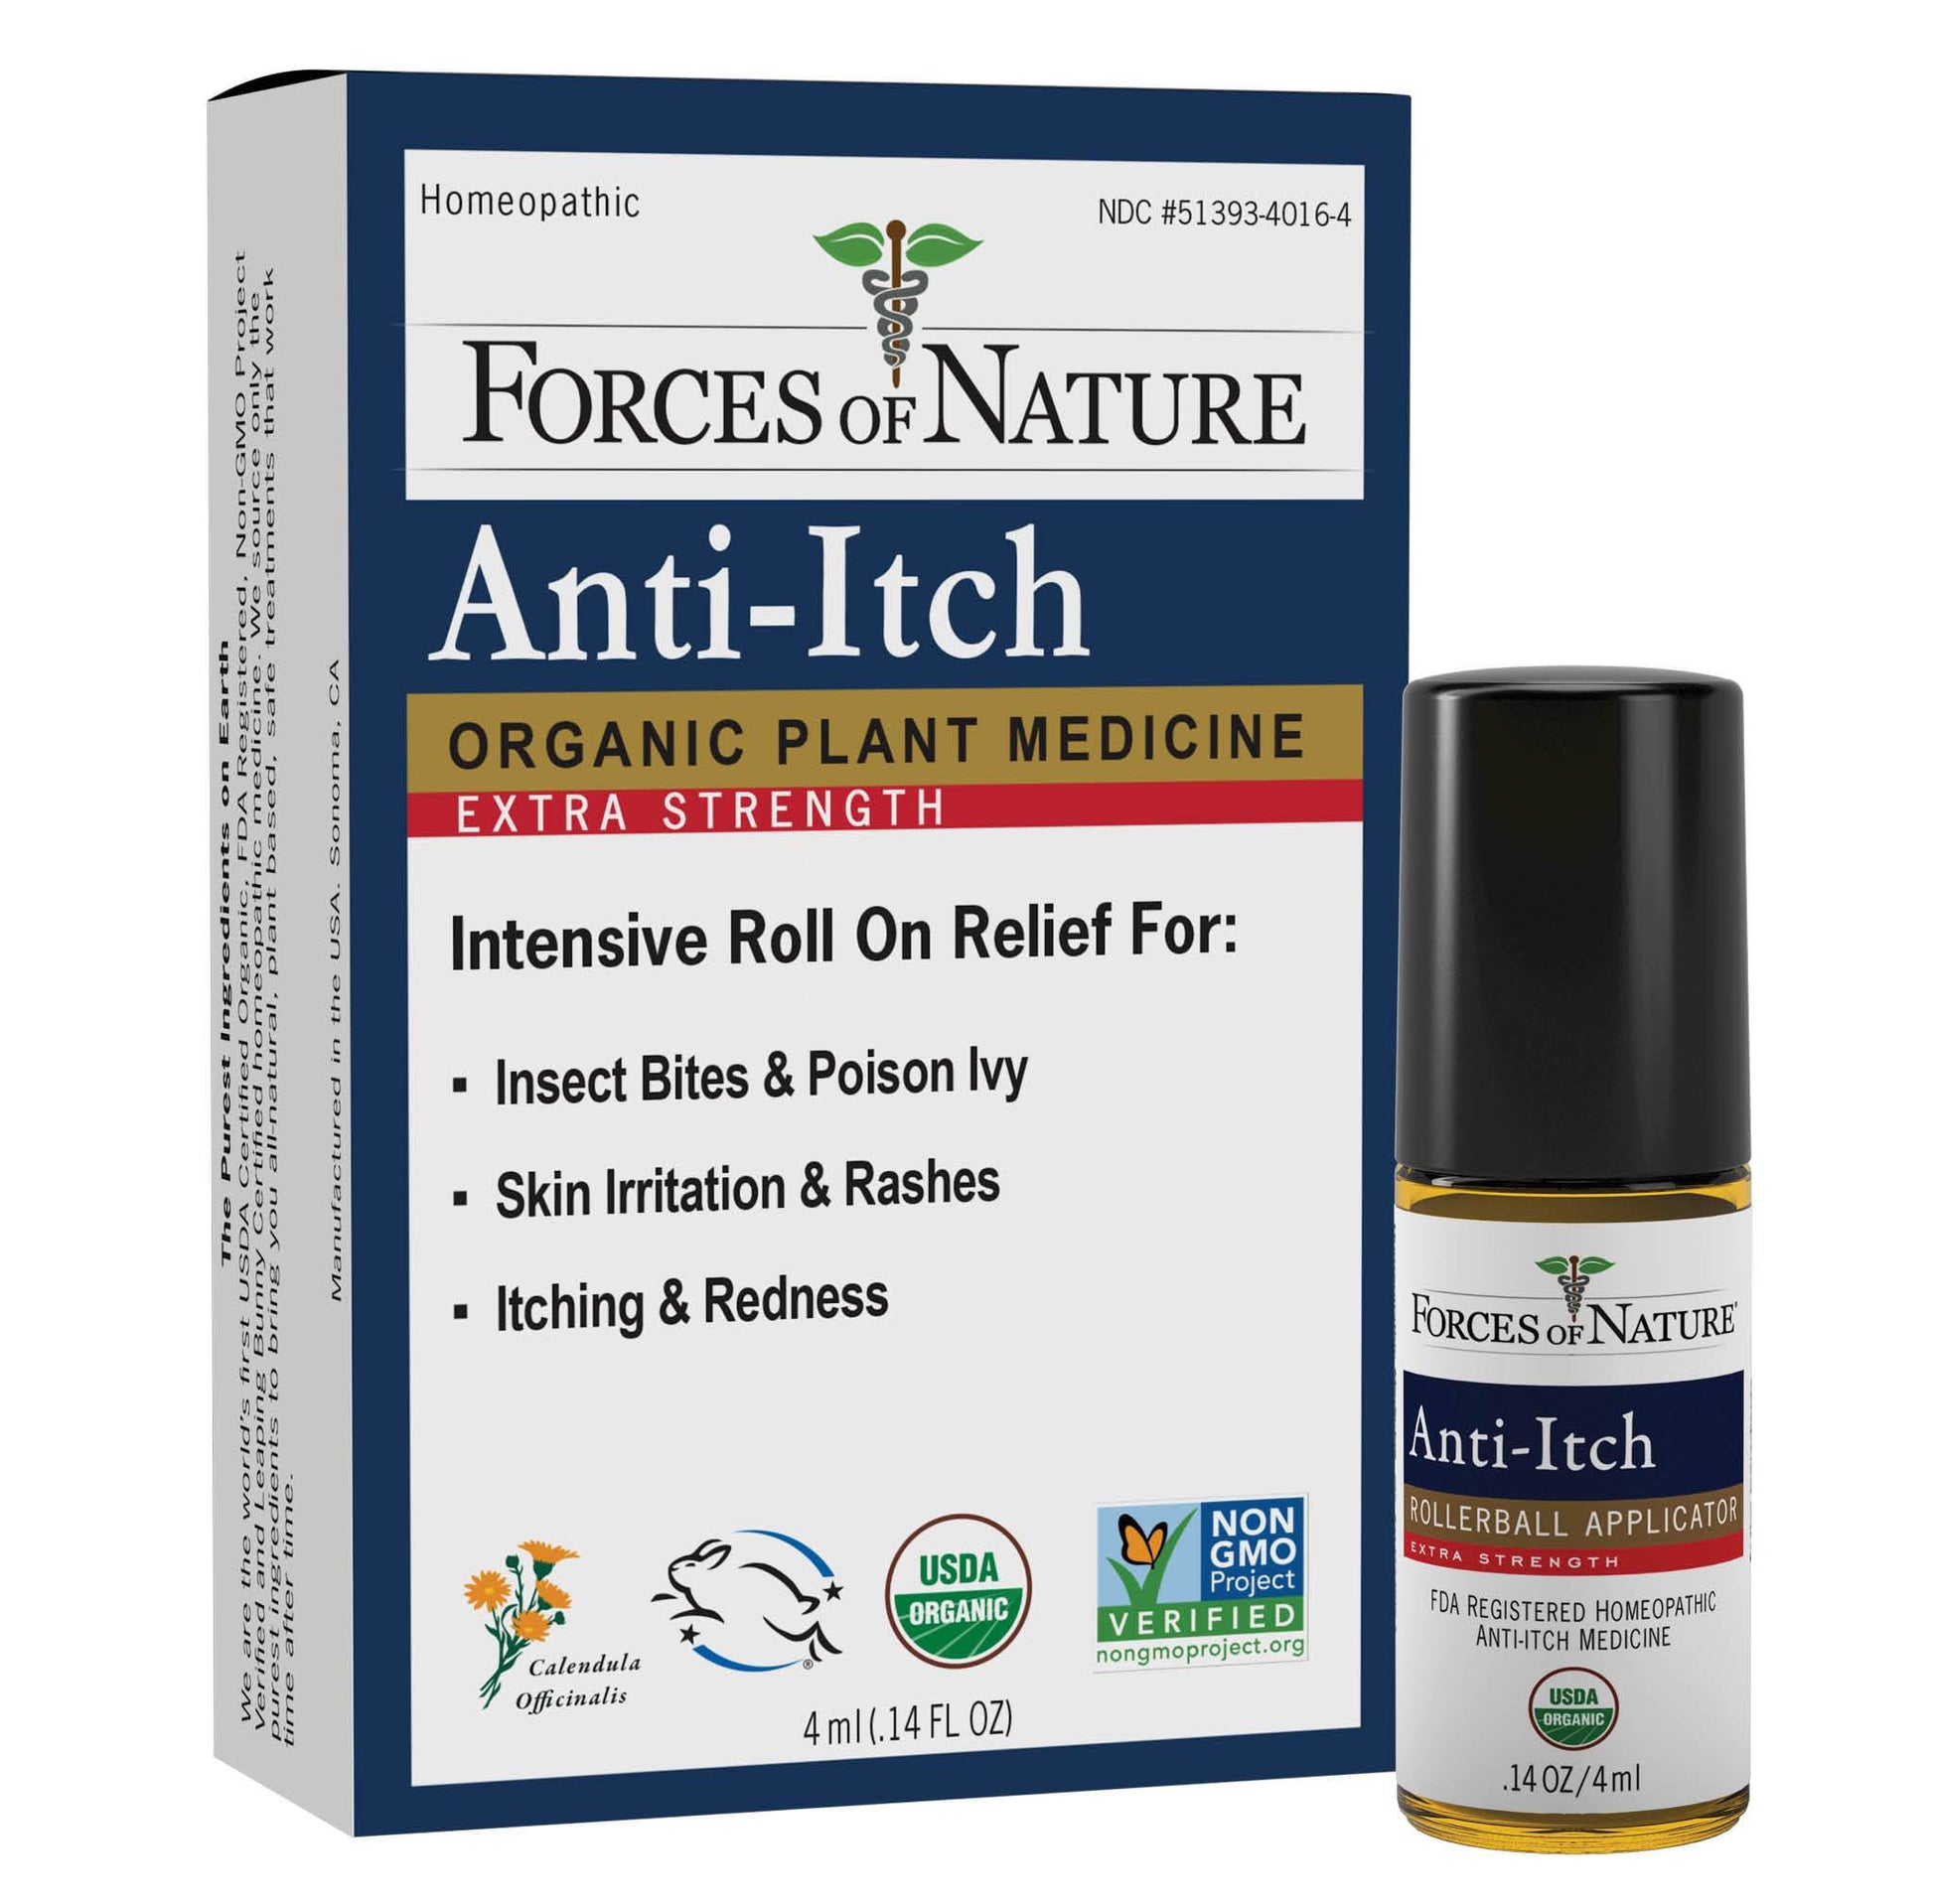 Anti-Itch Extra Strength - natural anti-itch remedy - Forces of Nature Medicine